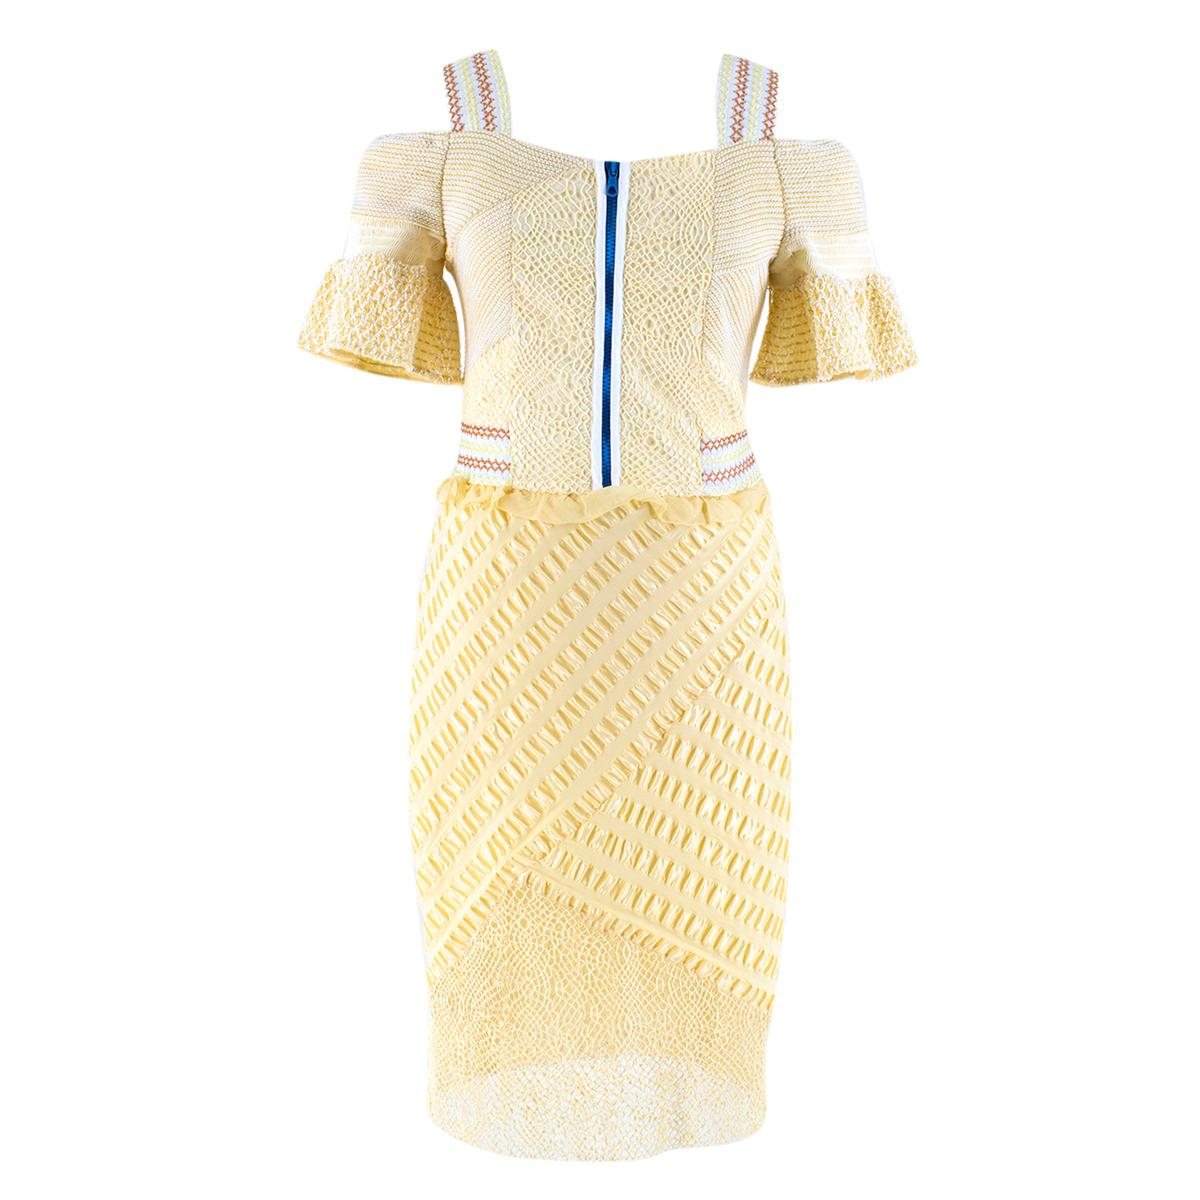 Peter Pilotto Amozon Selene Off-The-Shoulder Lace-Panel Dress

- Off-the-shoulder Dress
- Brand color: Lemon Yellow
- Lace paneled 
- Embroidered straps and details 
- Blue zip fastening closure at front 
- Zip fastening closure in side seam. 
- 67%